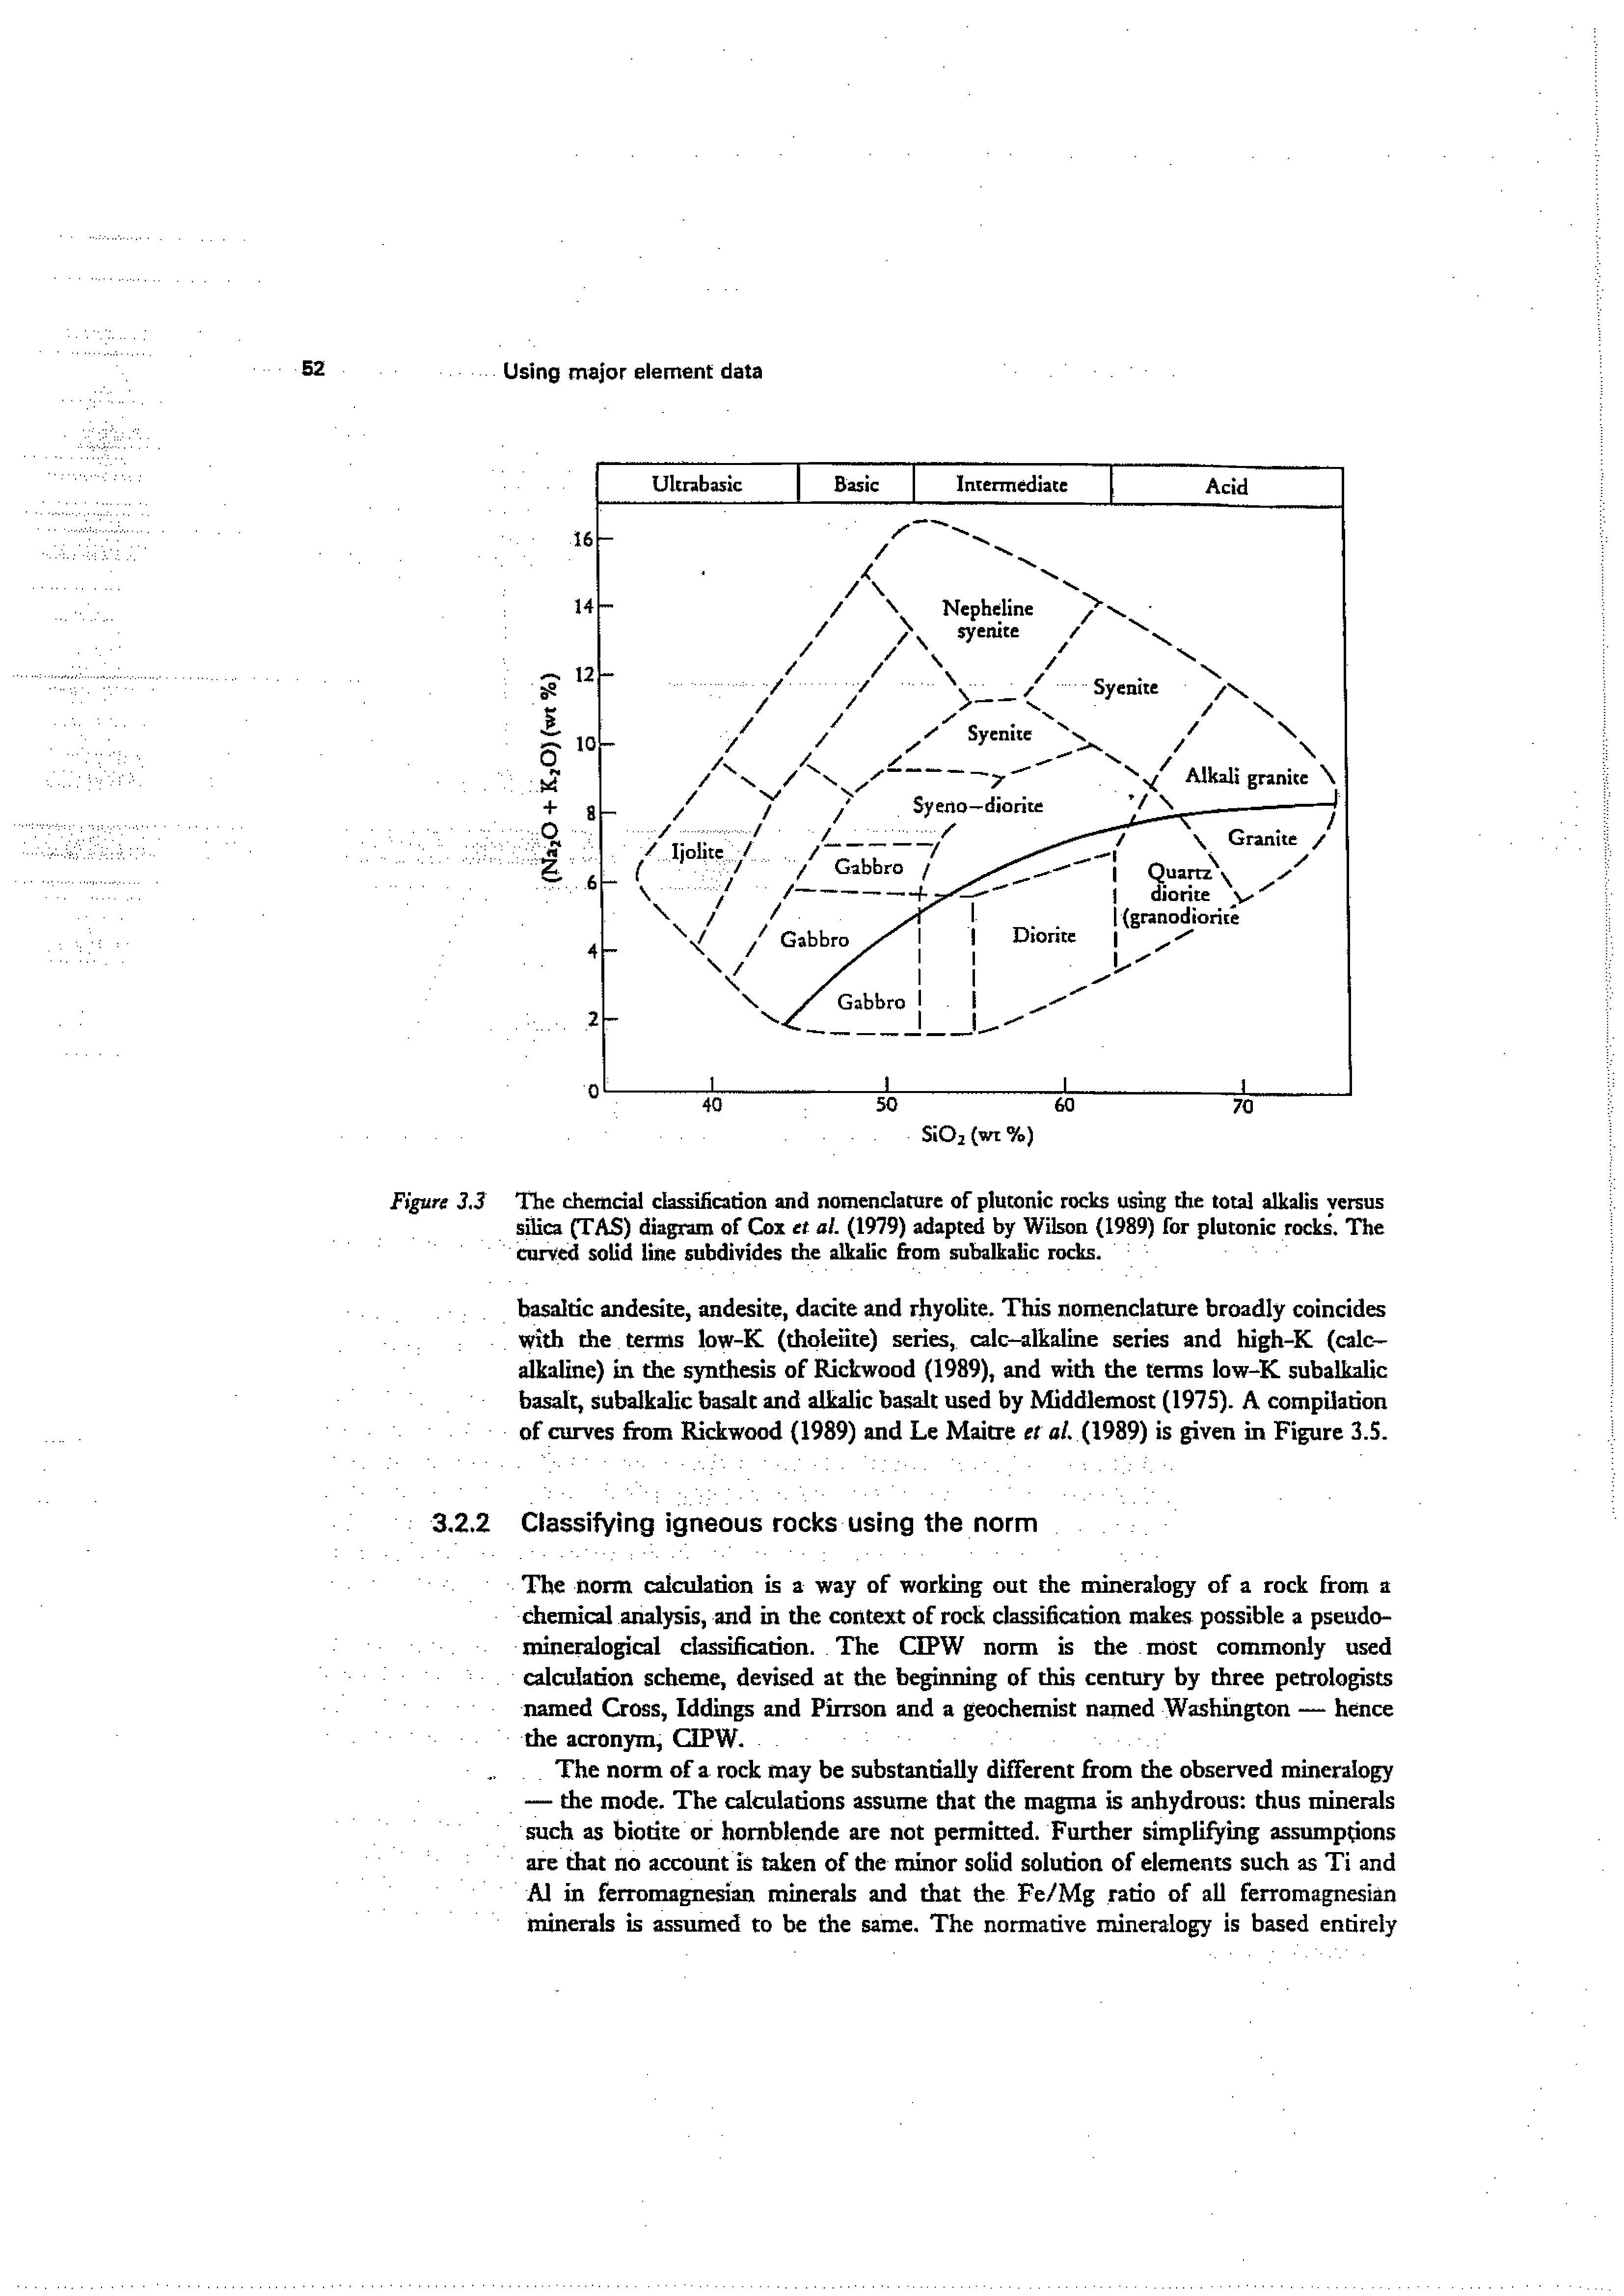 Figure 3,3 The chemcial classification and nomenclature of pluomic rodts using the total alkalis versus silica (TAS) diagram of Cox et ai (1979) adapted by Wilson (1989) for plutonic rocks. The curved solid line subdivides the alkalic from subalkaiic ro<. -...